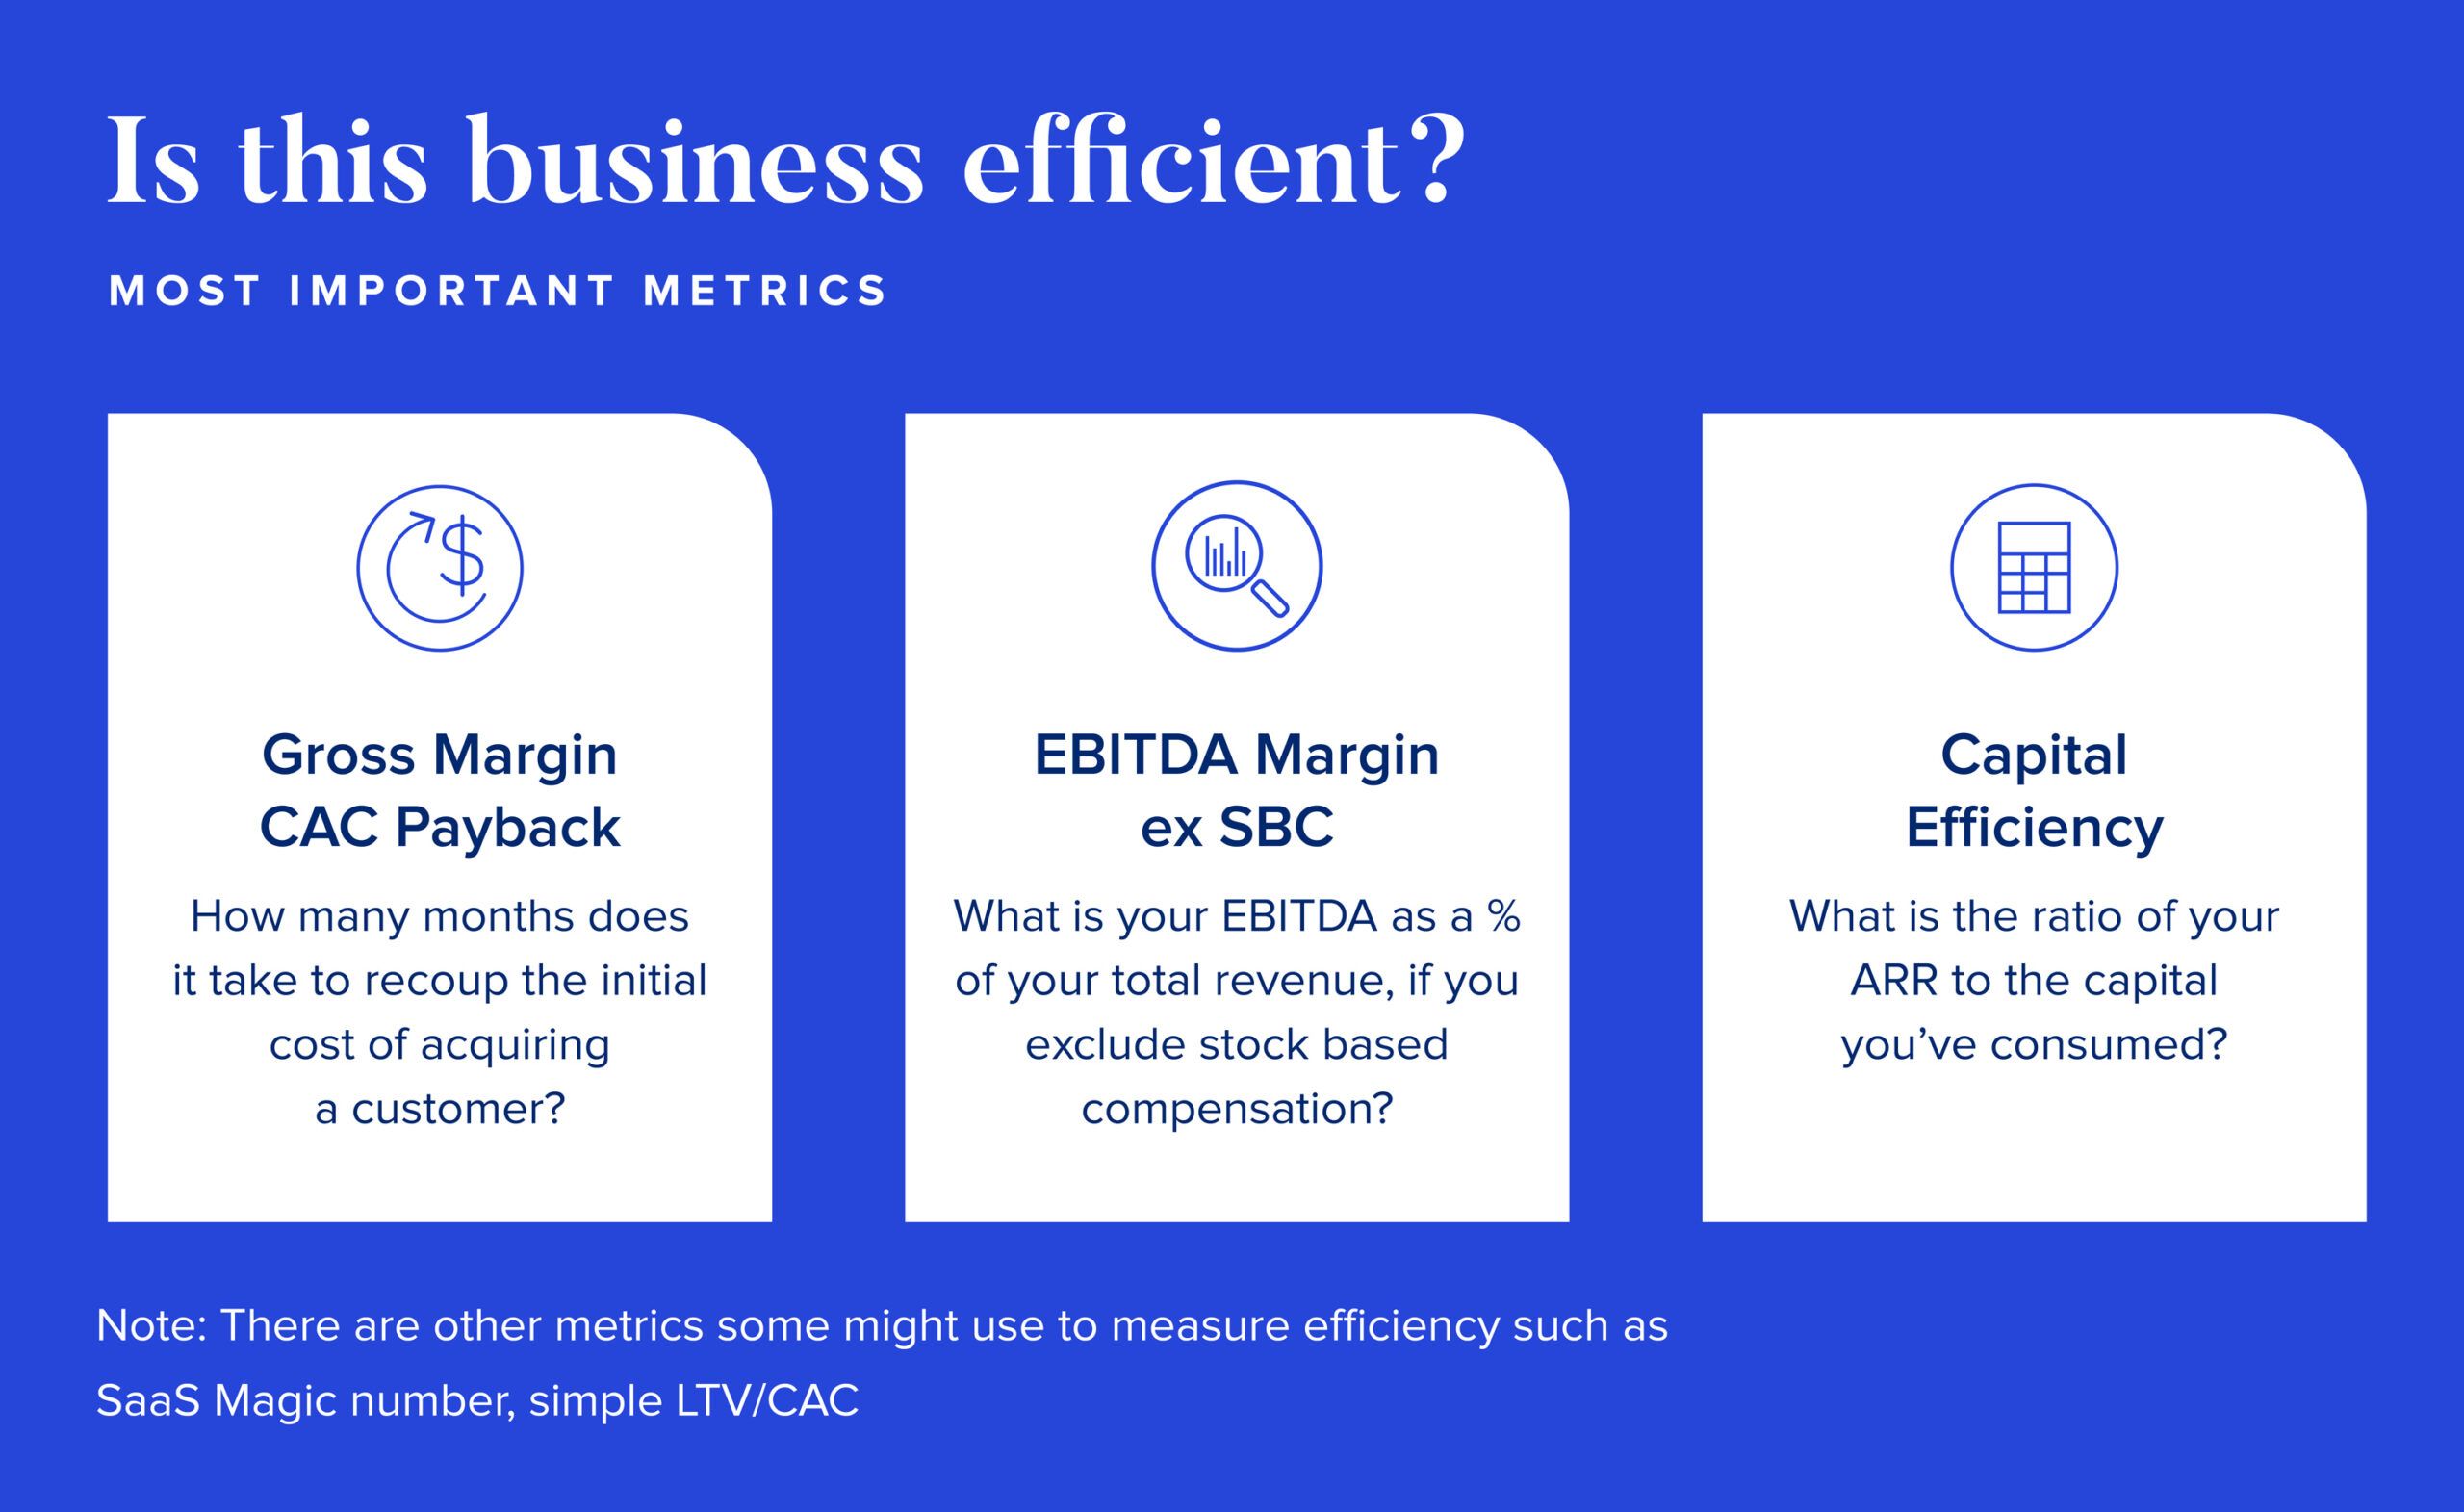 Is this business efficient? Most important metrics: gross margin CAC payback, EBITDA margin ex SBC, capital efficiency 